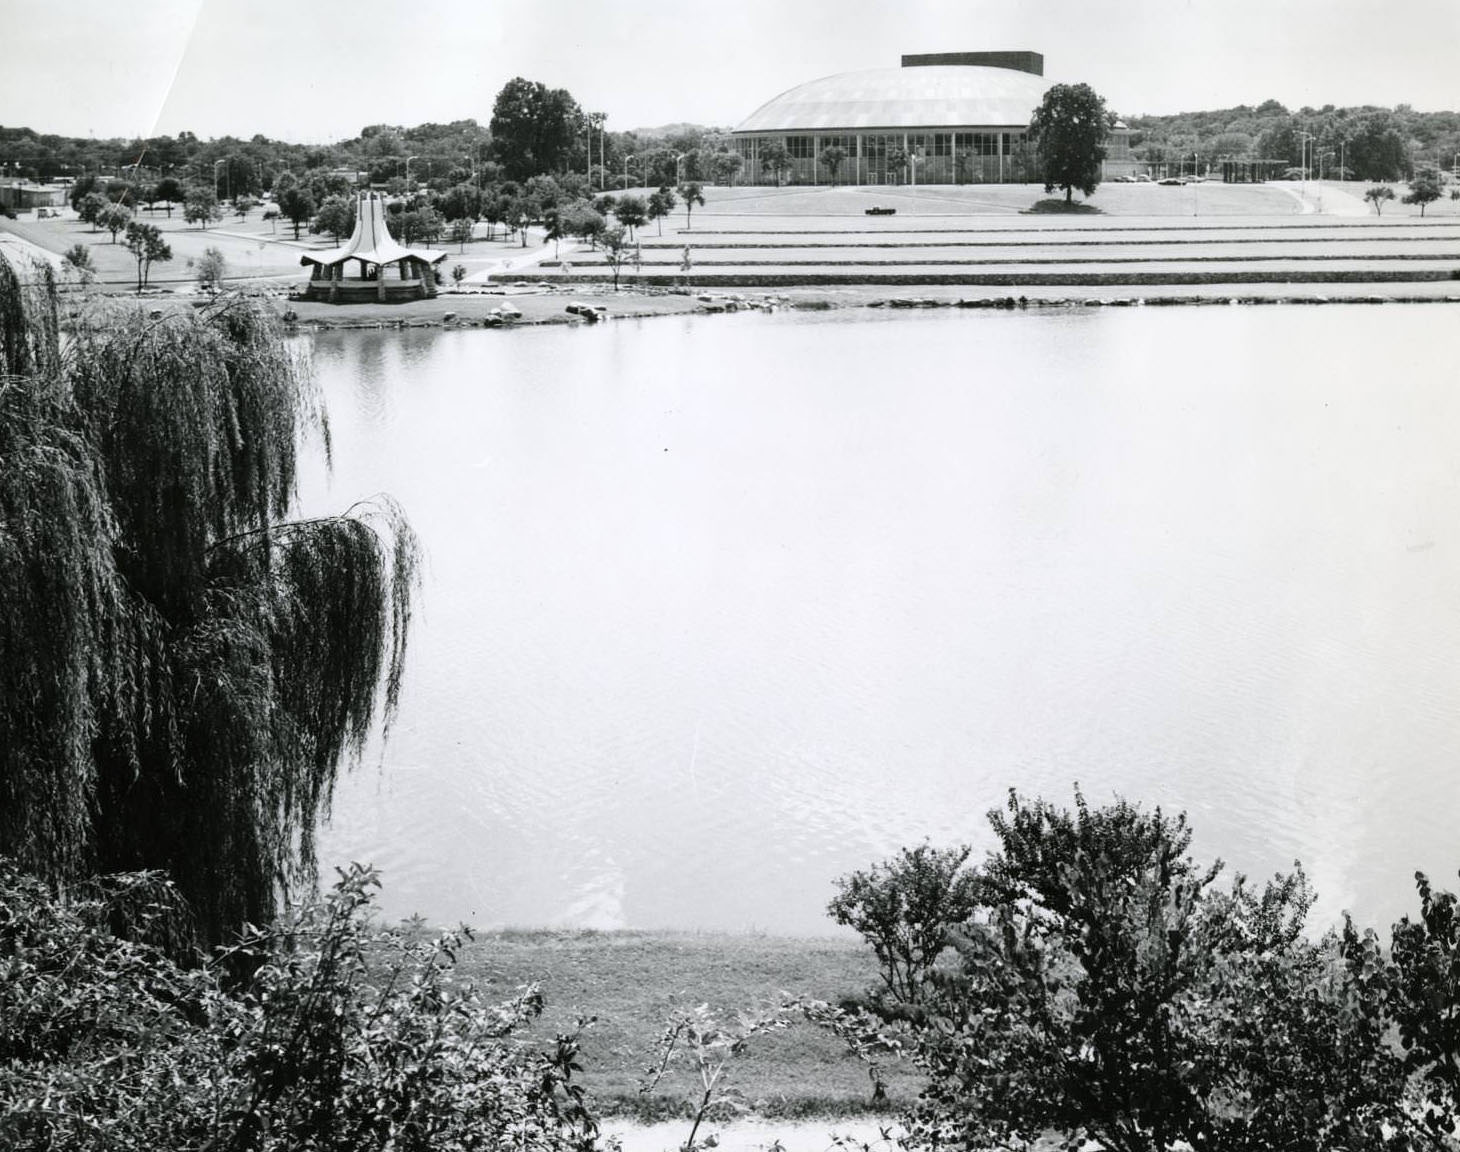 View of Municipal Auditorium from across the Lake, 1969